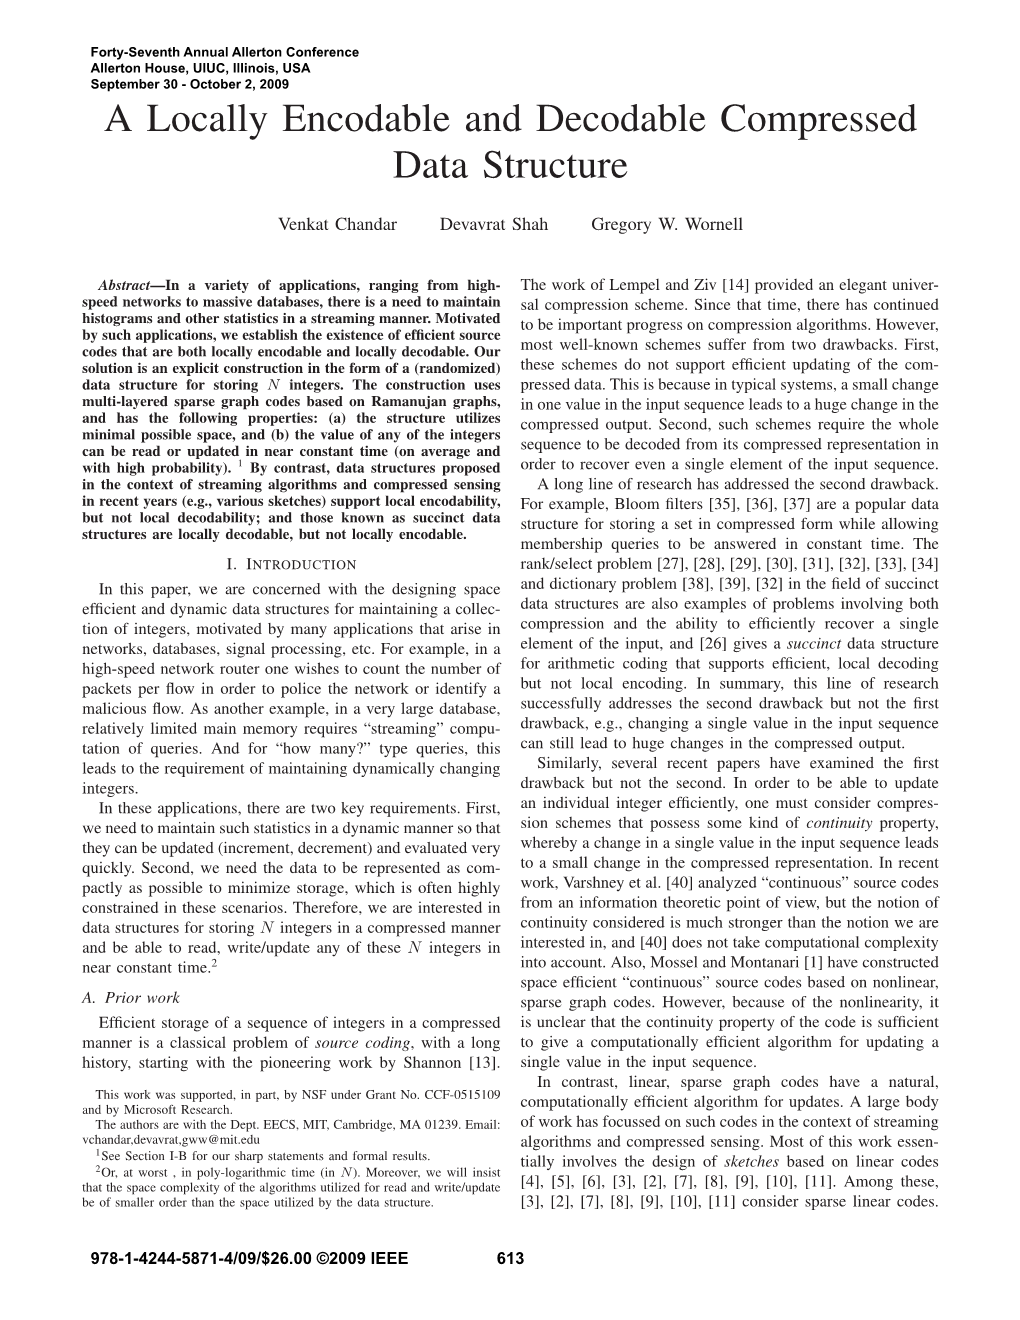 A Locally Encodable and Decodable Compressed Data Structure